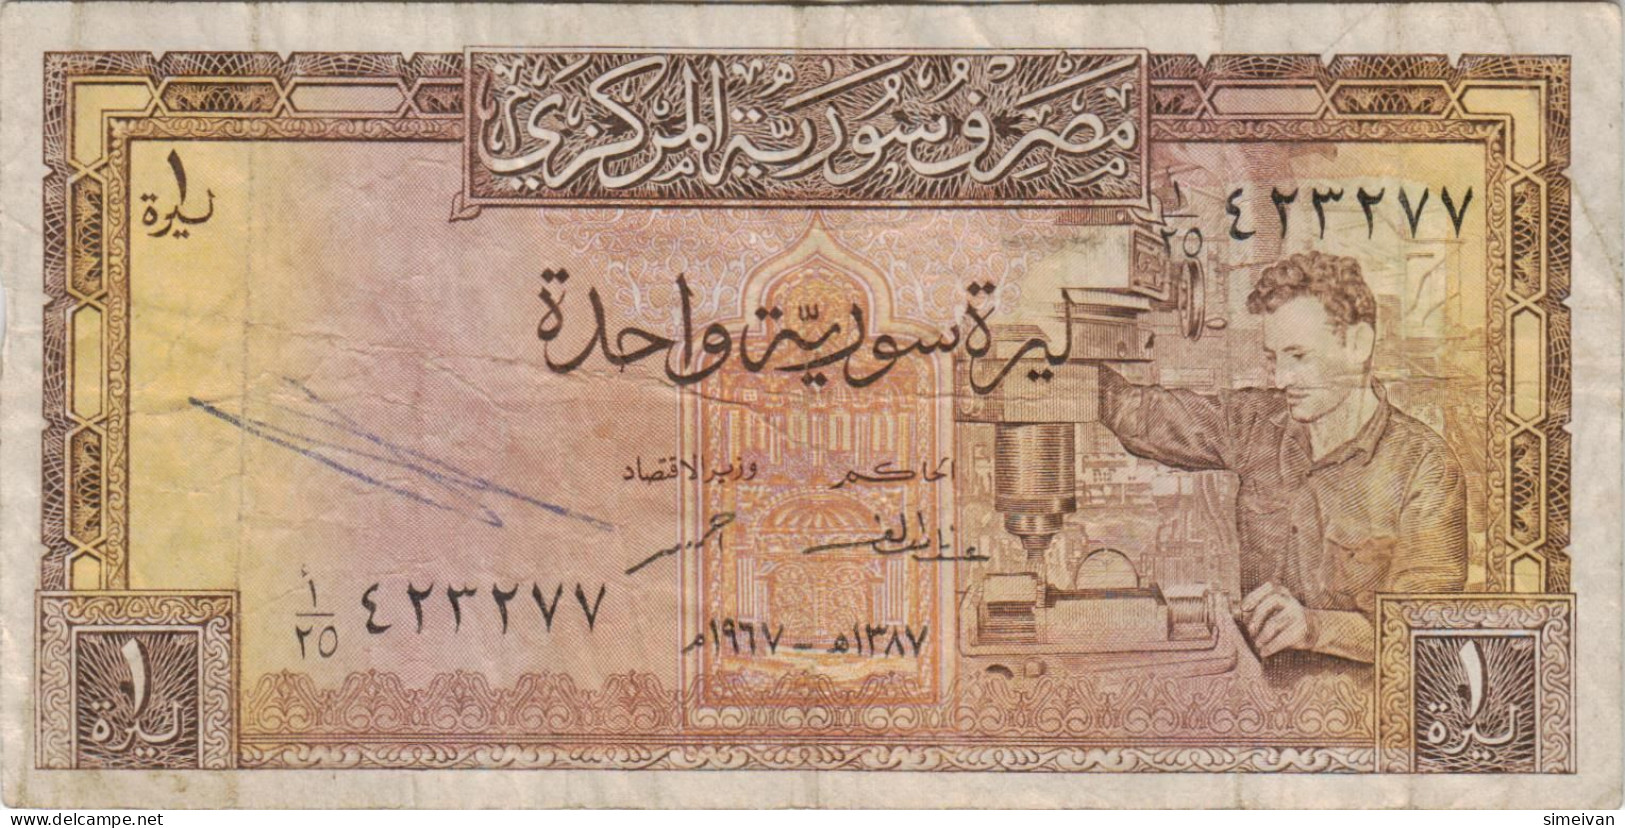 Syria 1 Pound 1967 P-93b Banknote Middle East Currency Syrie Syrien #5341 - Siria